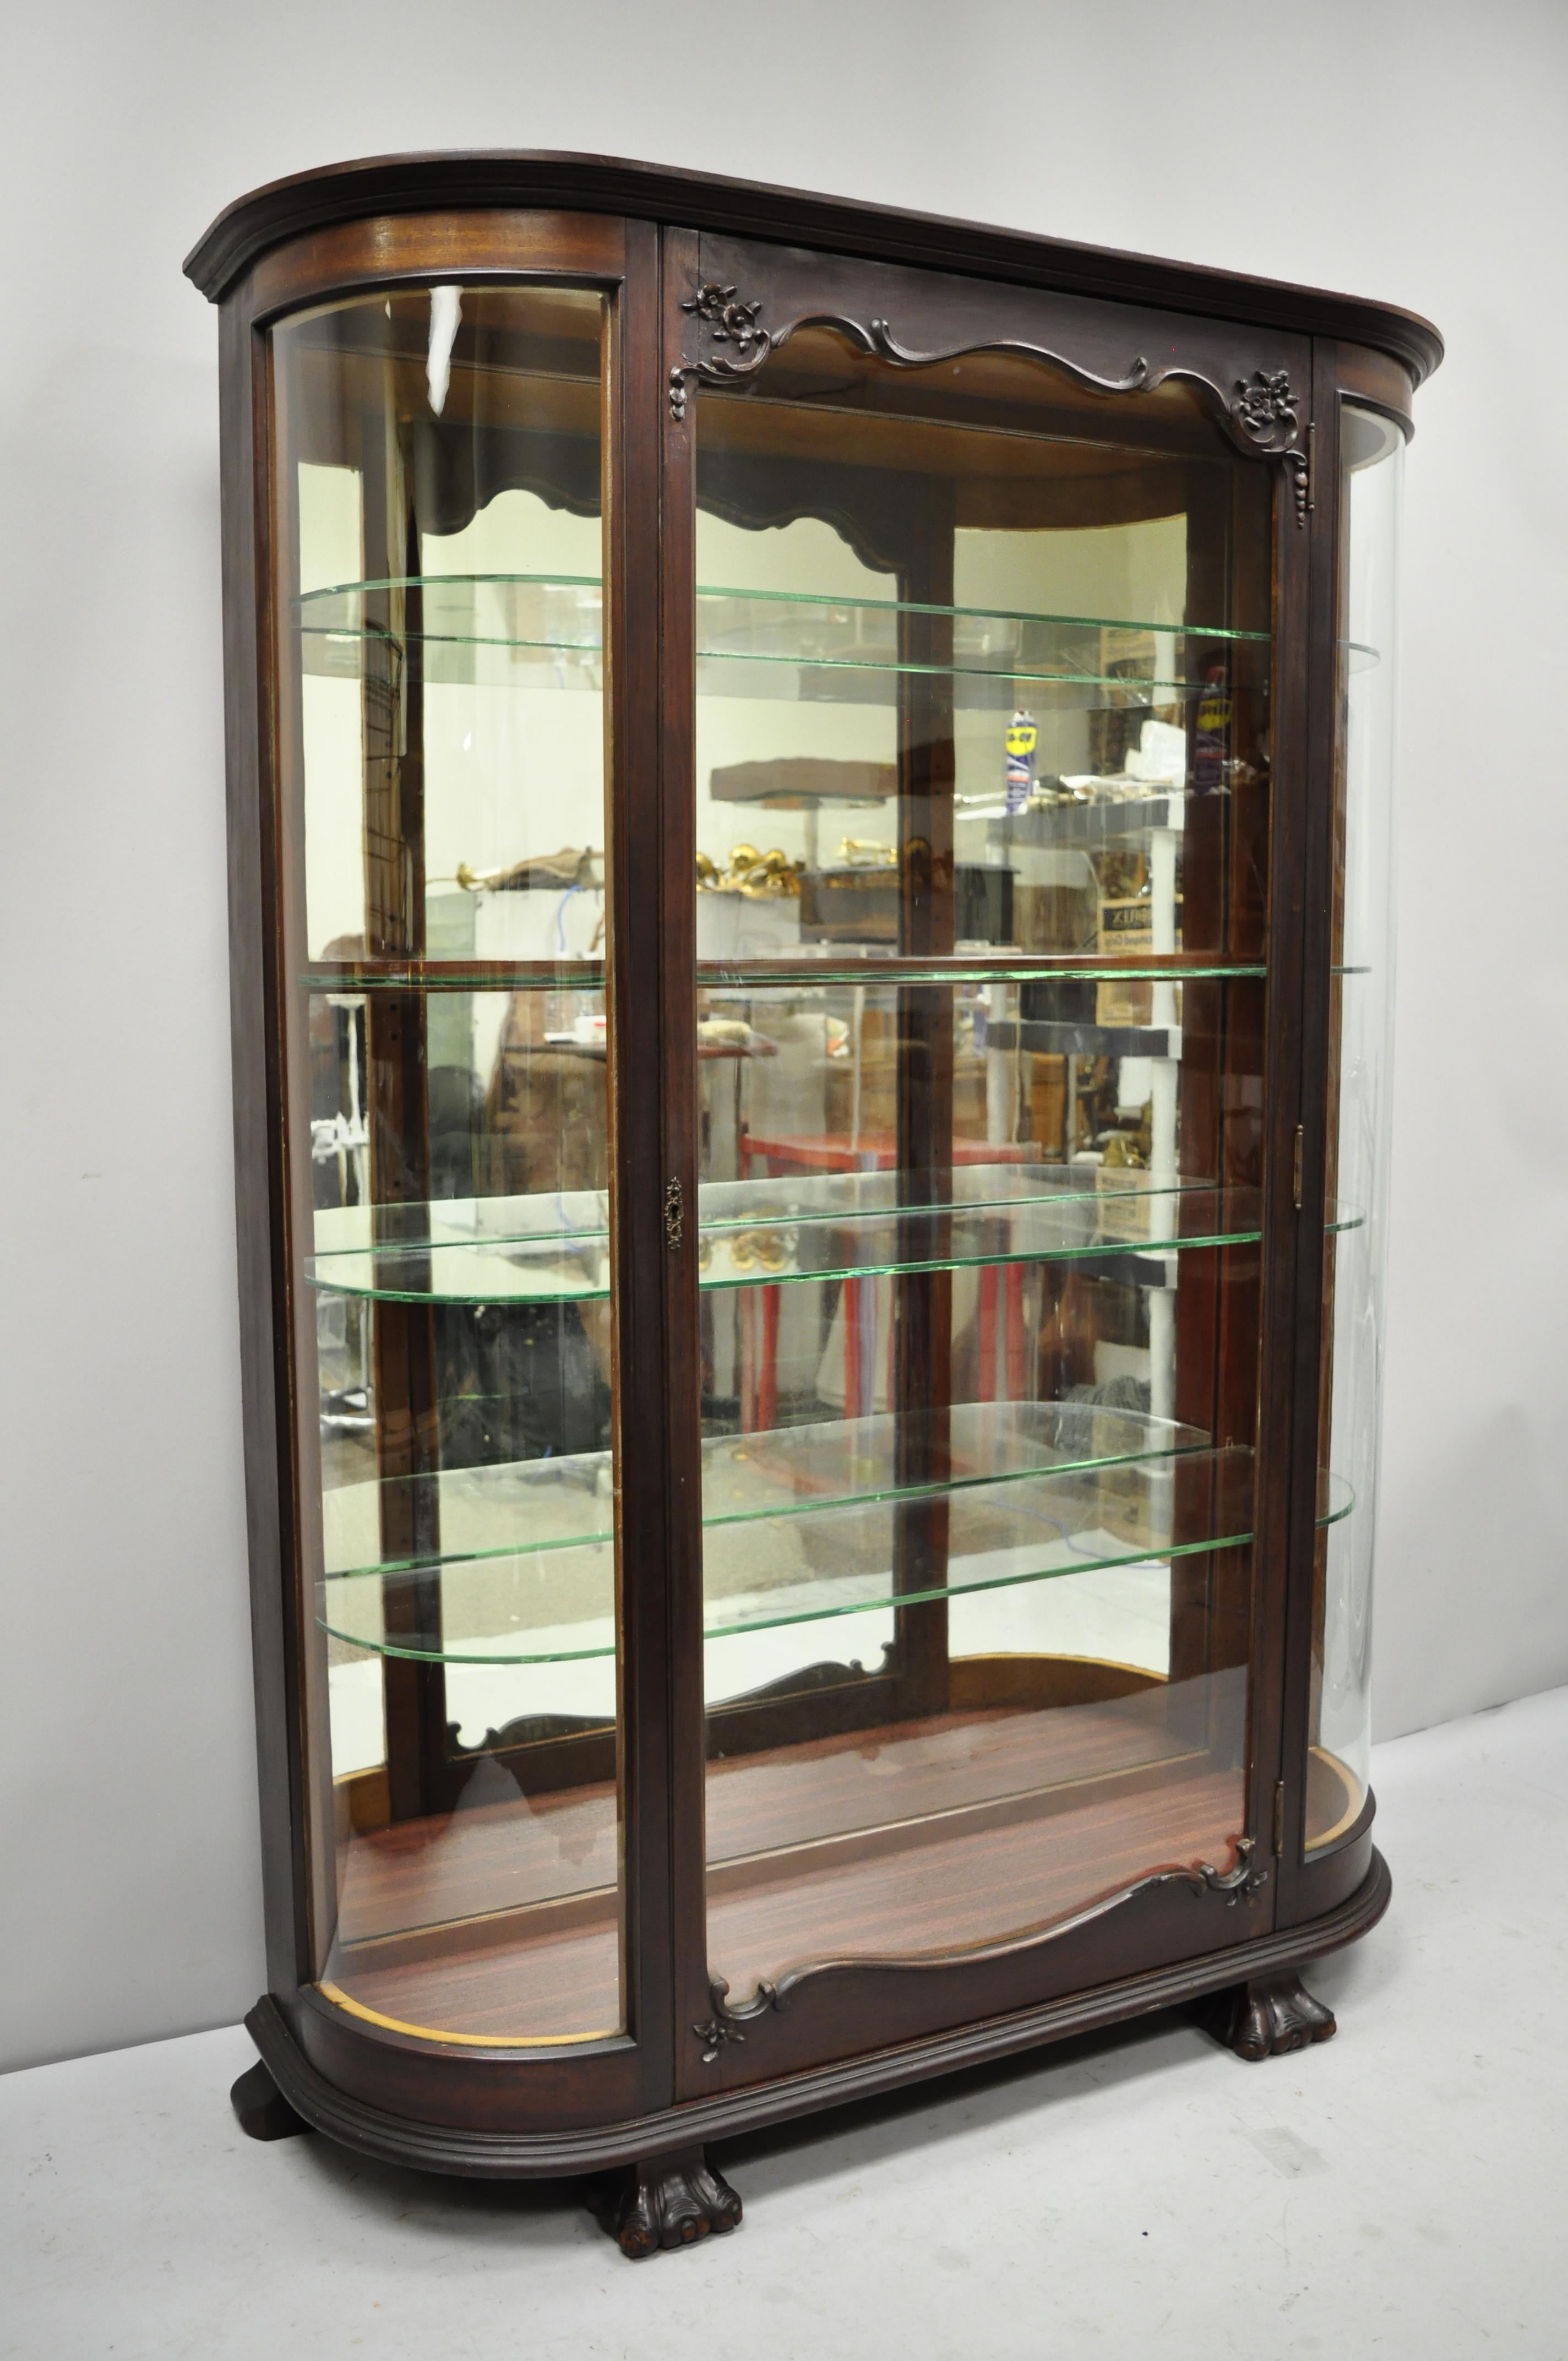 Antique American Empire bow glass carved mahogany claw foot china cabinet. Item features 2 bowed glass panels, mirror back, paw feet, mahogany wood frame, nicely carved details, no key, but unlocked, 4 adjustable glass shelves, very nice antique